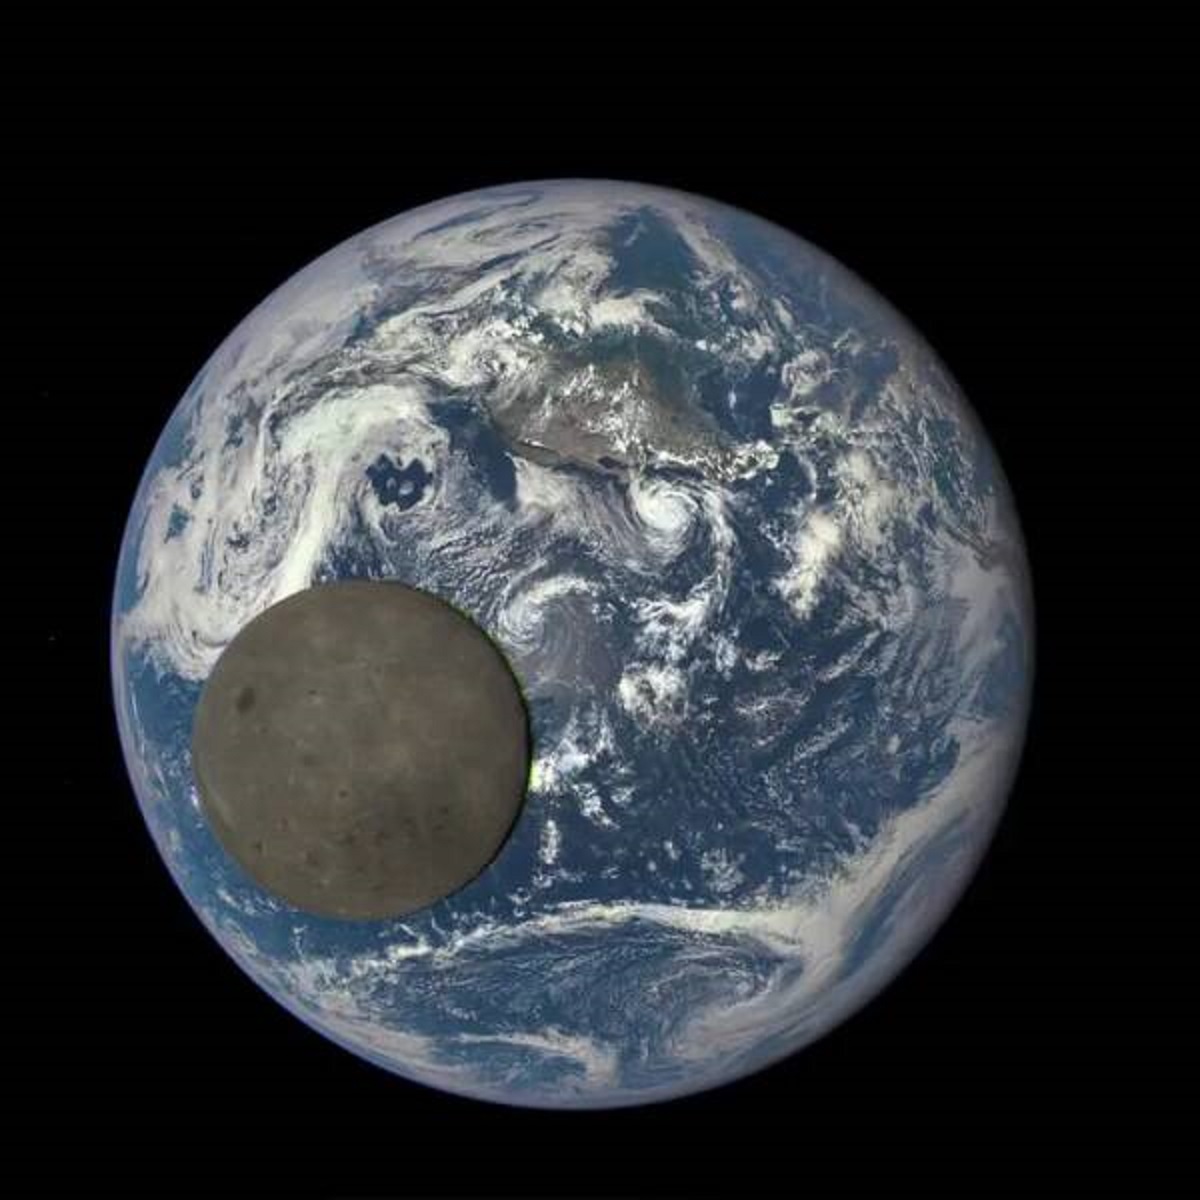 This is a REAL picture of the moon crossing in front of the Earth: